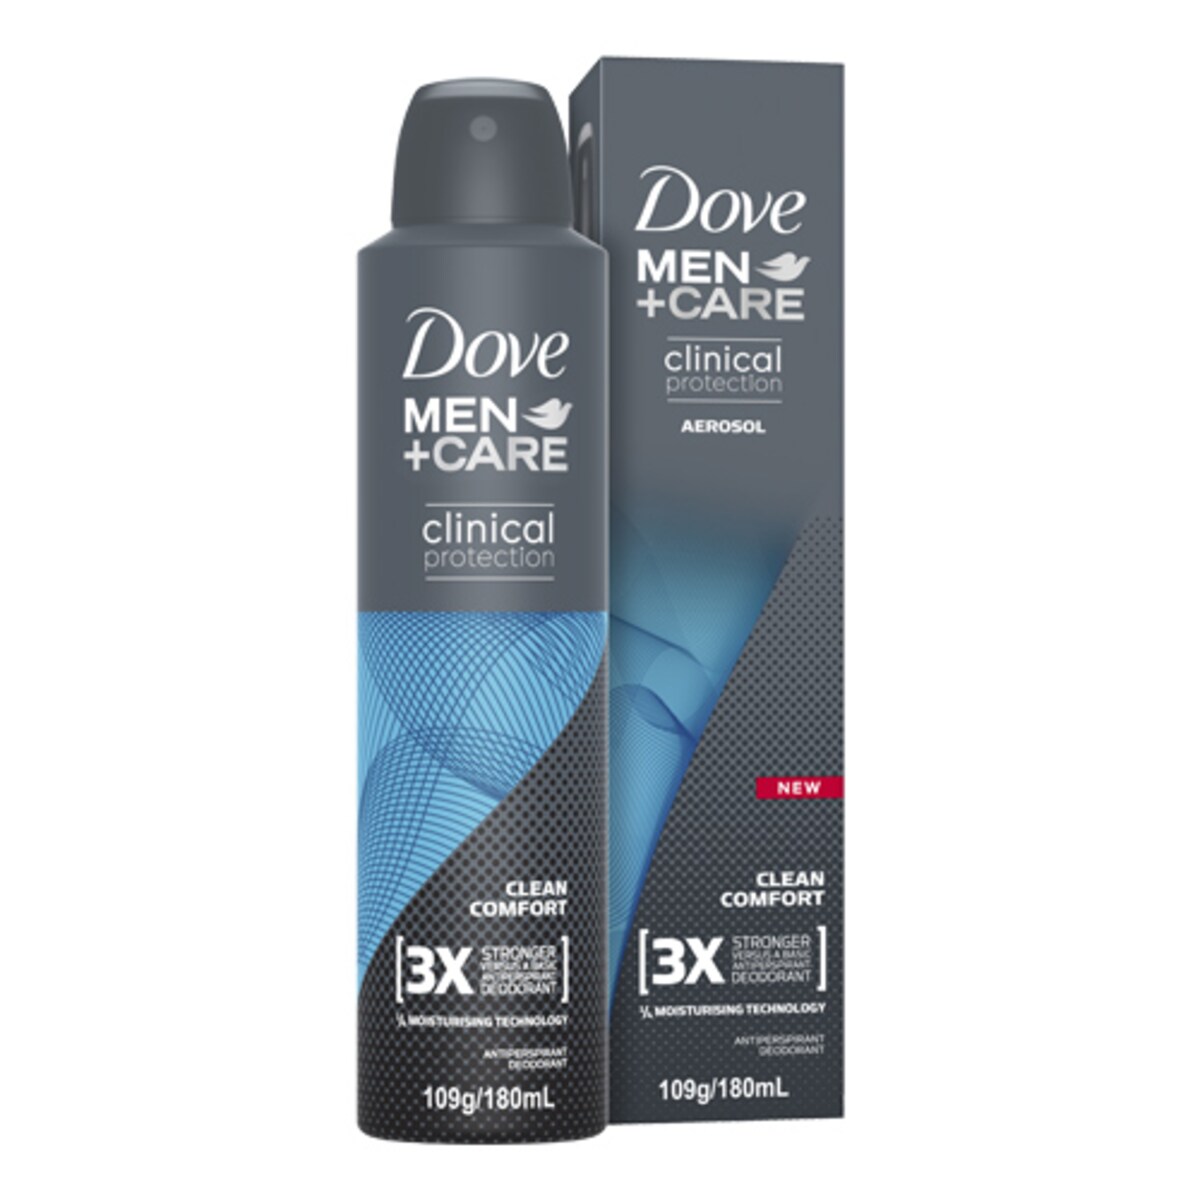 Dove Men + Care Clinical Protection Spray Clean Comfort 180ml